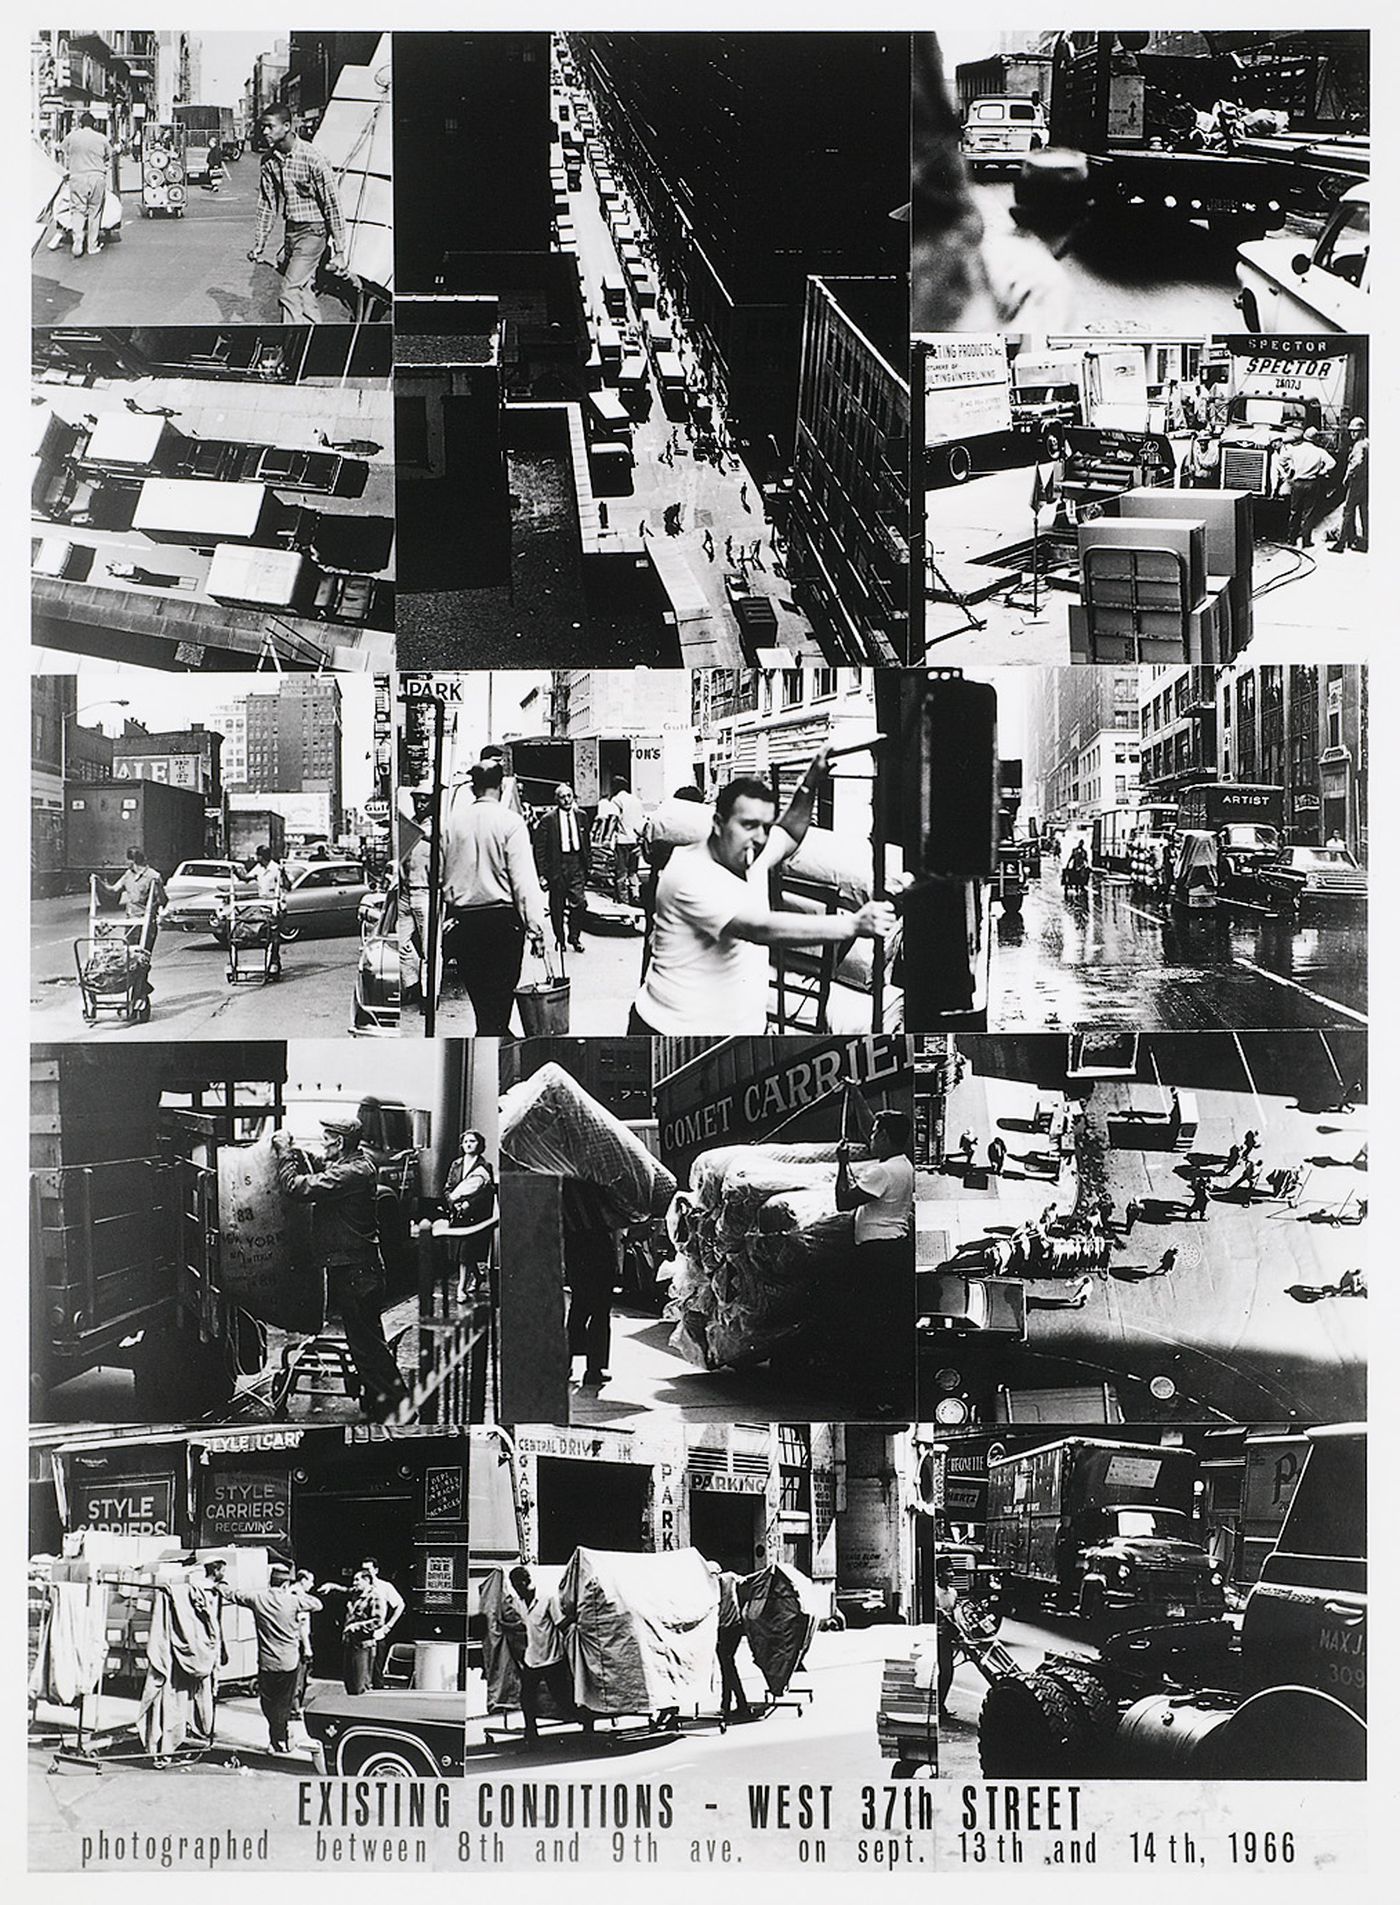 Photomontage incorporating portraits of workers and pedestrians and views of buildings and traffic on West 37th Street, Manhattan, New York City, New York